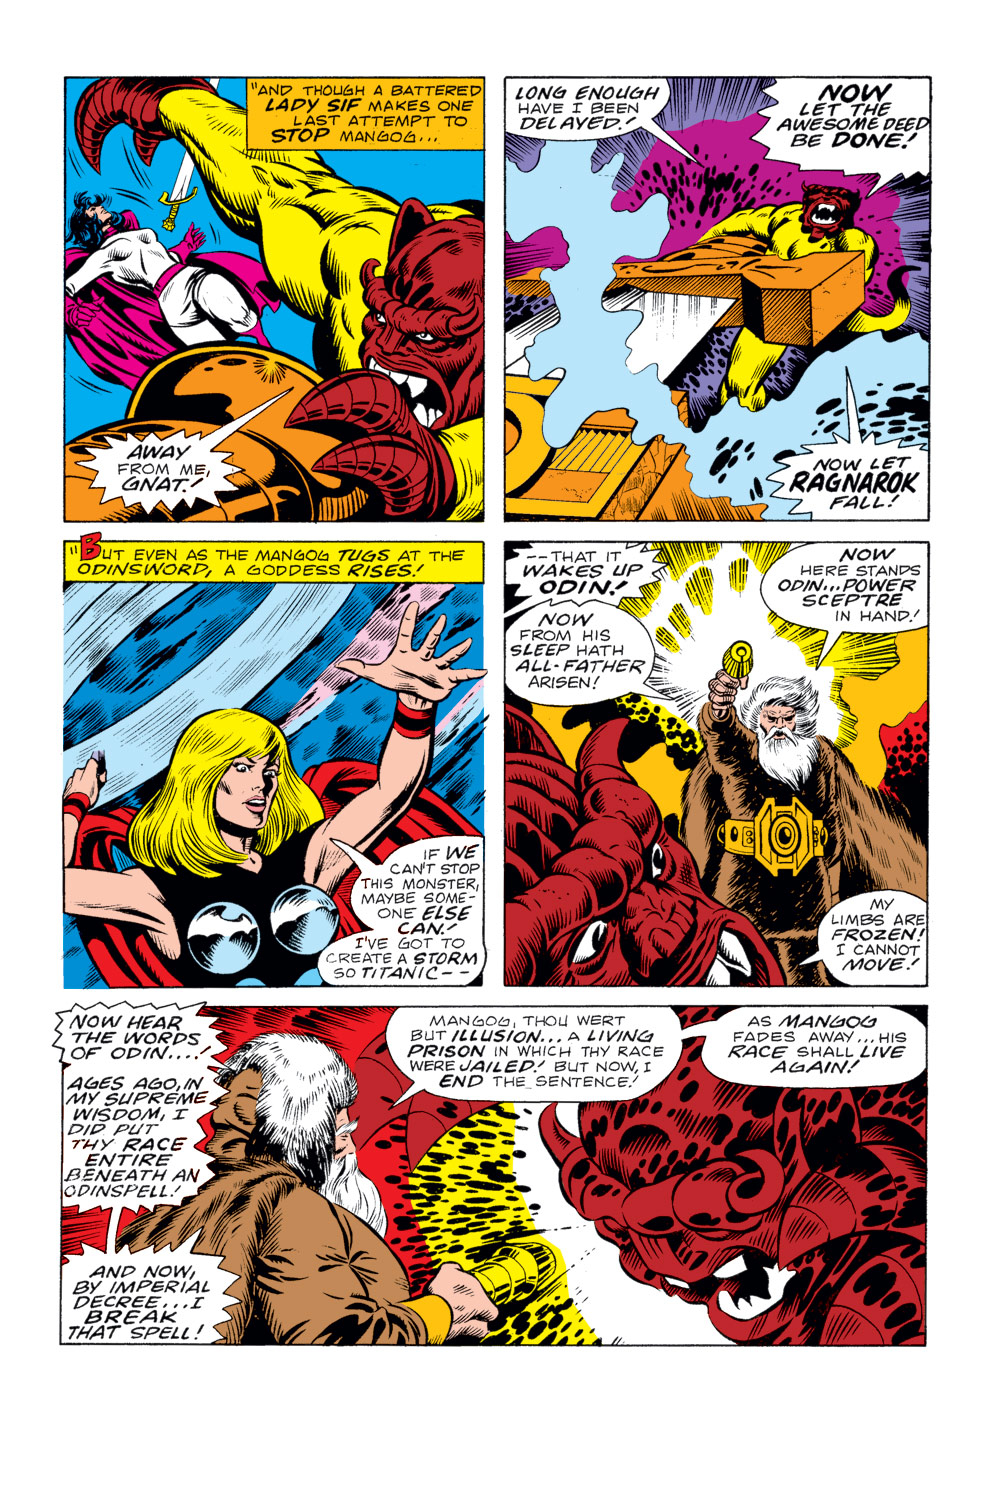 What If? (1977) issue 10 - Jane Foster had found the hammer of Thor - Page 31